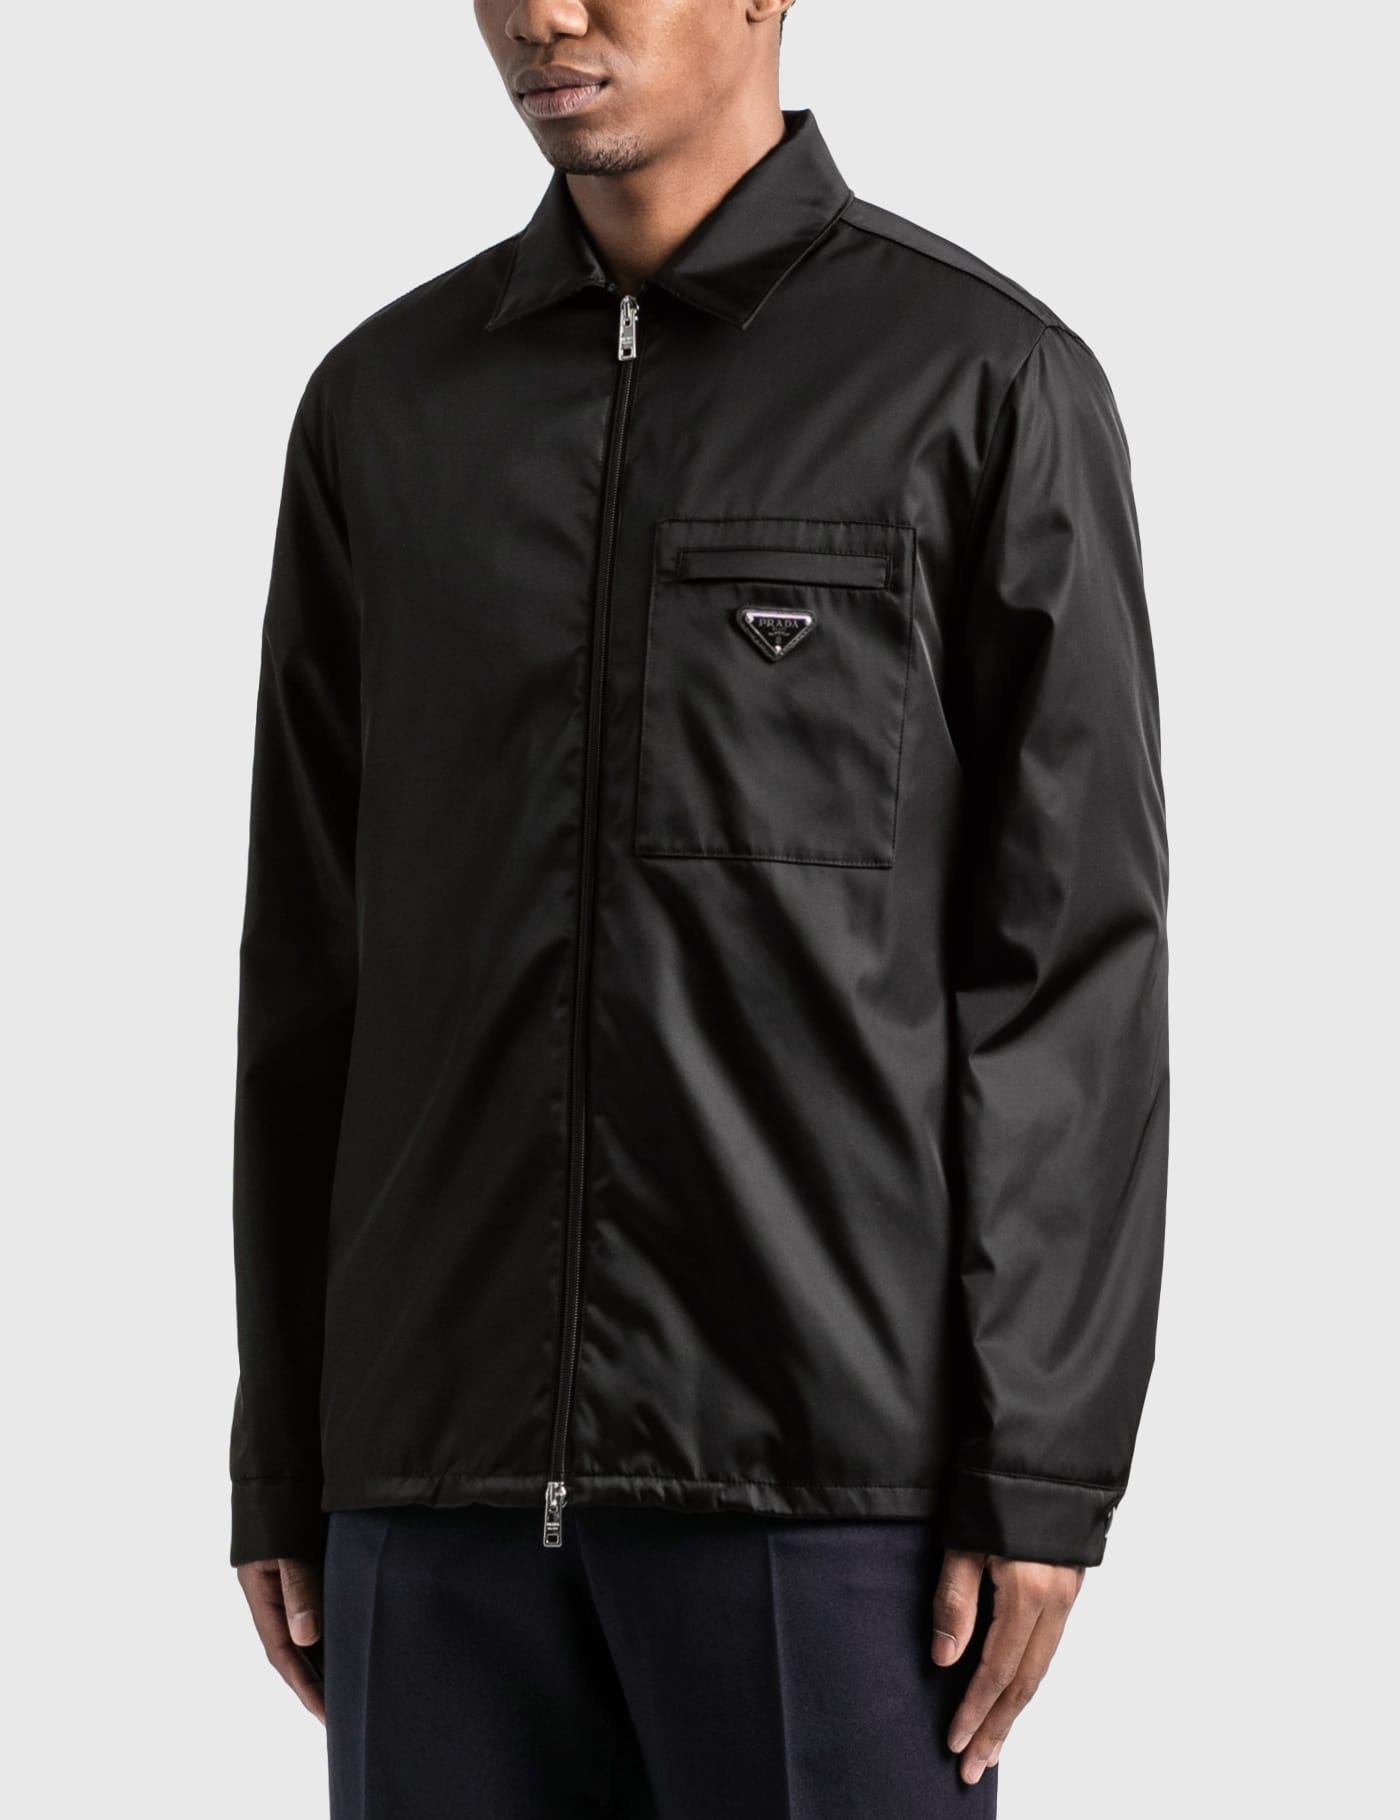 Prada - Re-Nylon Zip Up Jacket | HBX - Globally Curated Fashion and  Lifestyle by Hypebeast